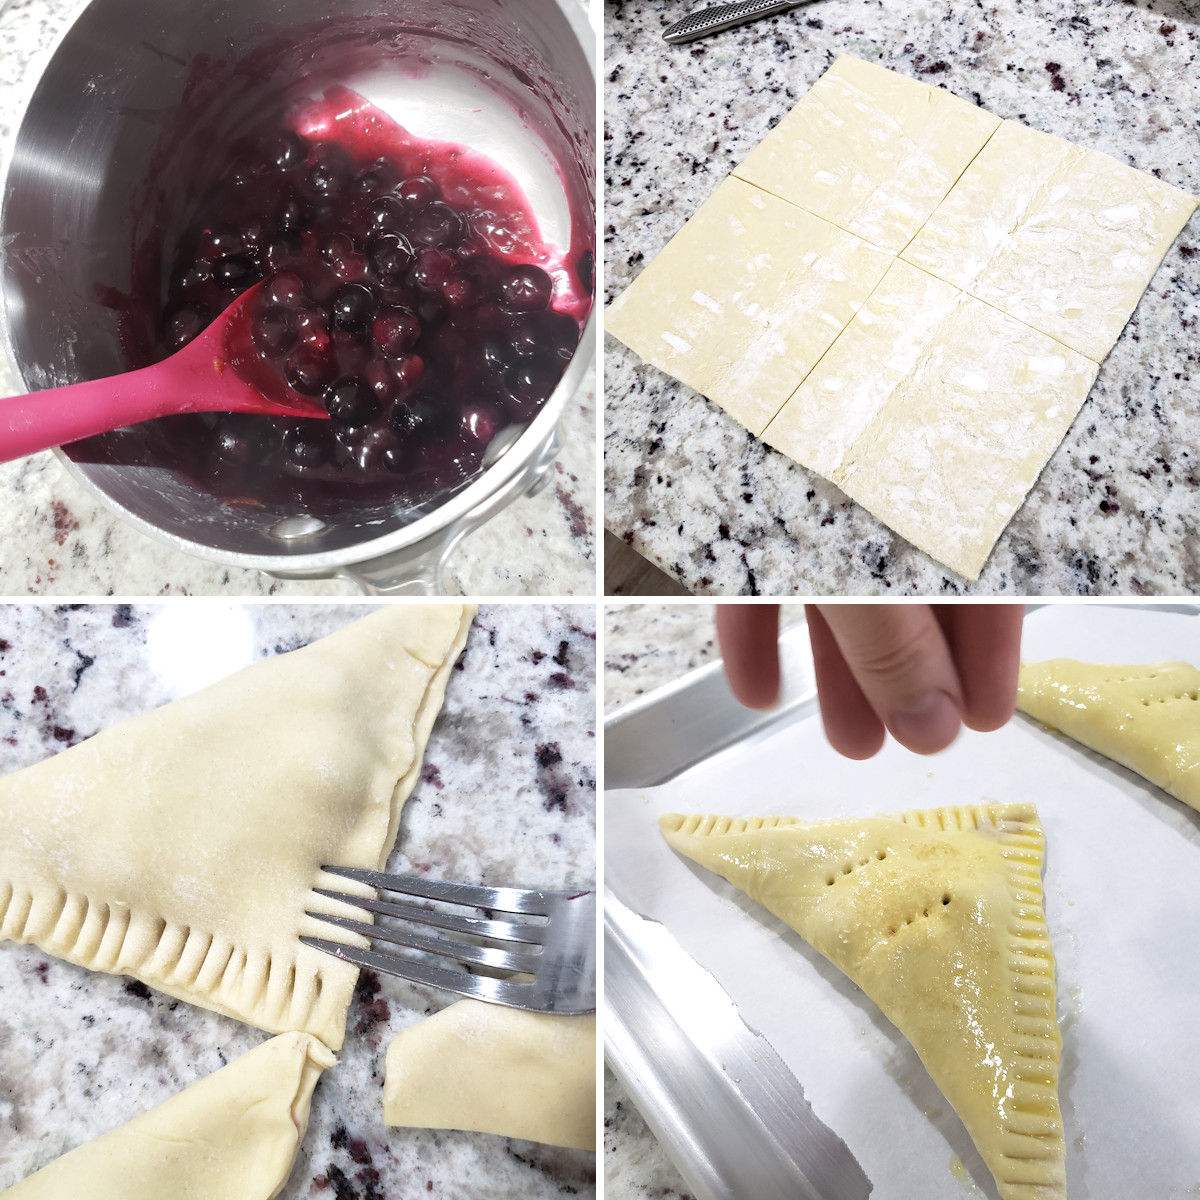 Assembling puff pastry blueberry turnovers.